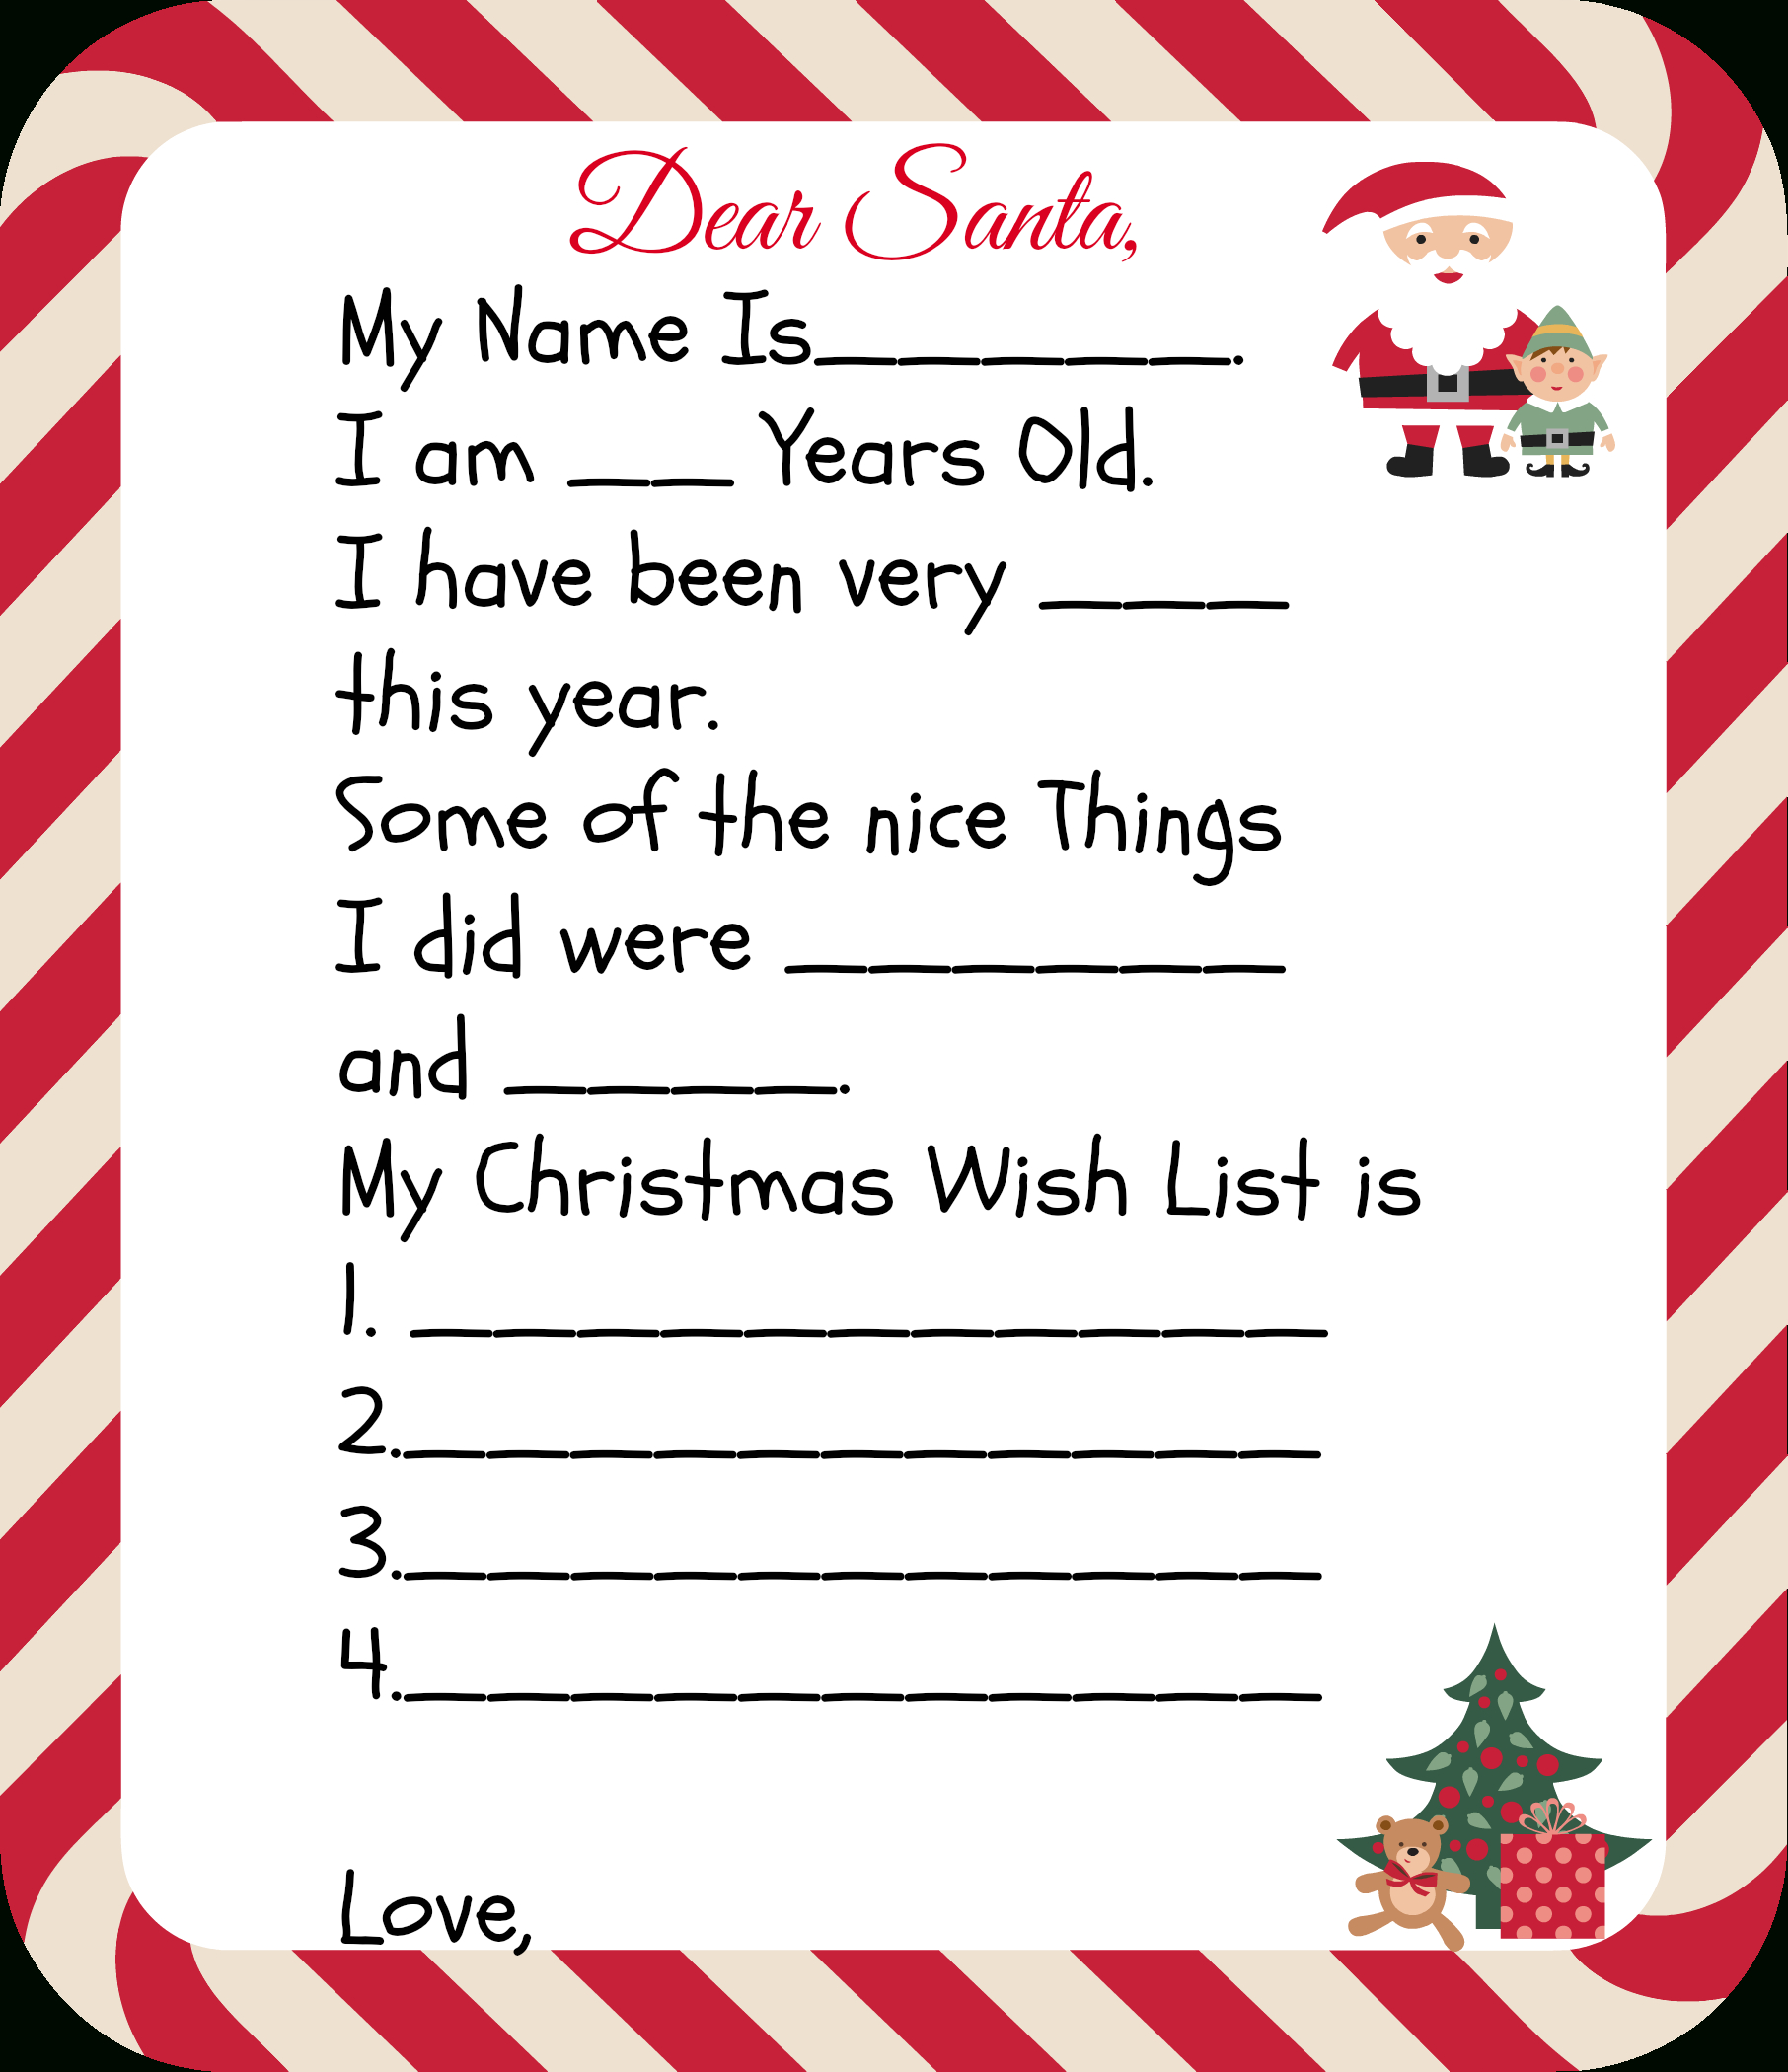 Free Printable Santa Letters For Kids | Holiday Ideas: Christmas - Letter To Santa Template Free Printable